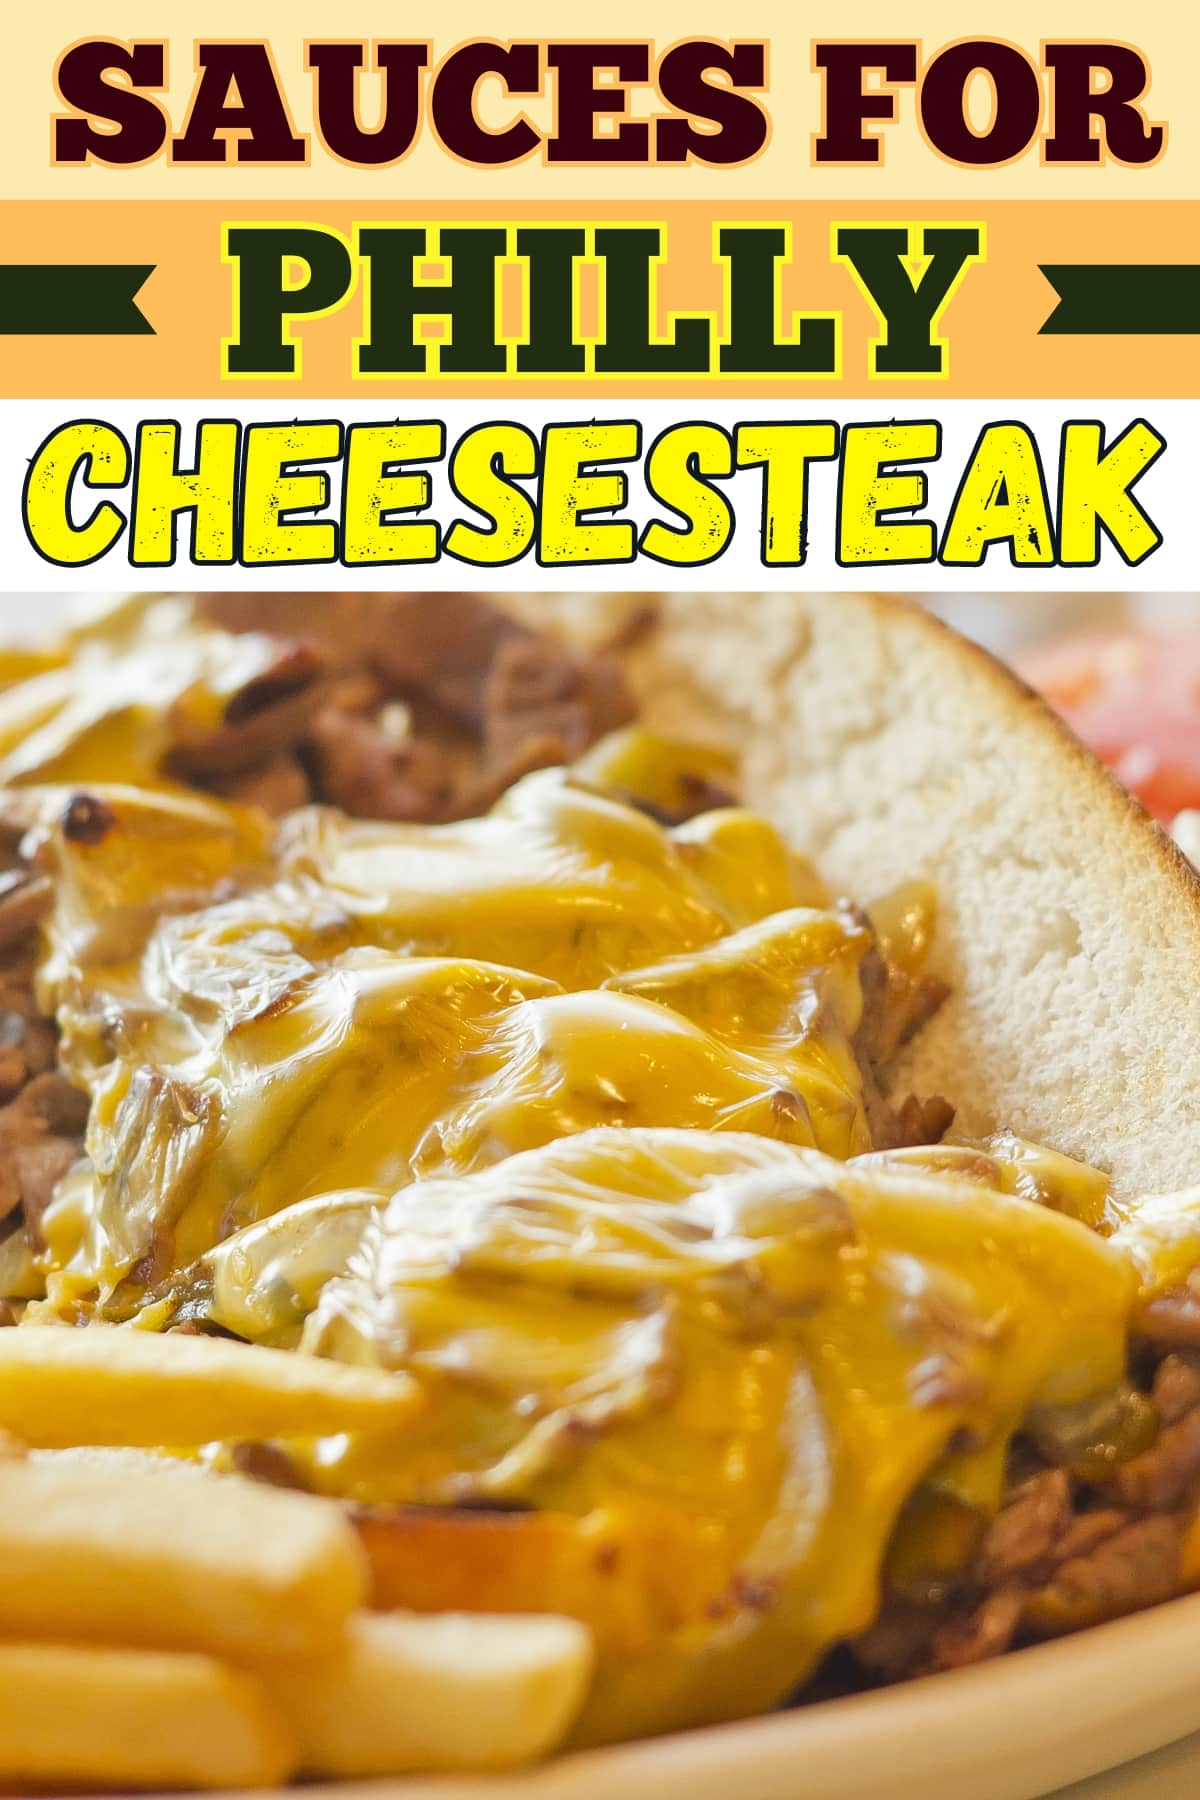 Sauces for Philly Cheesesteak